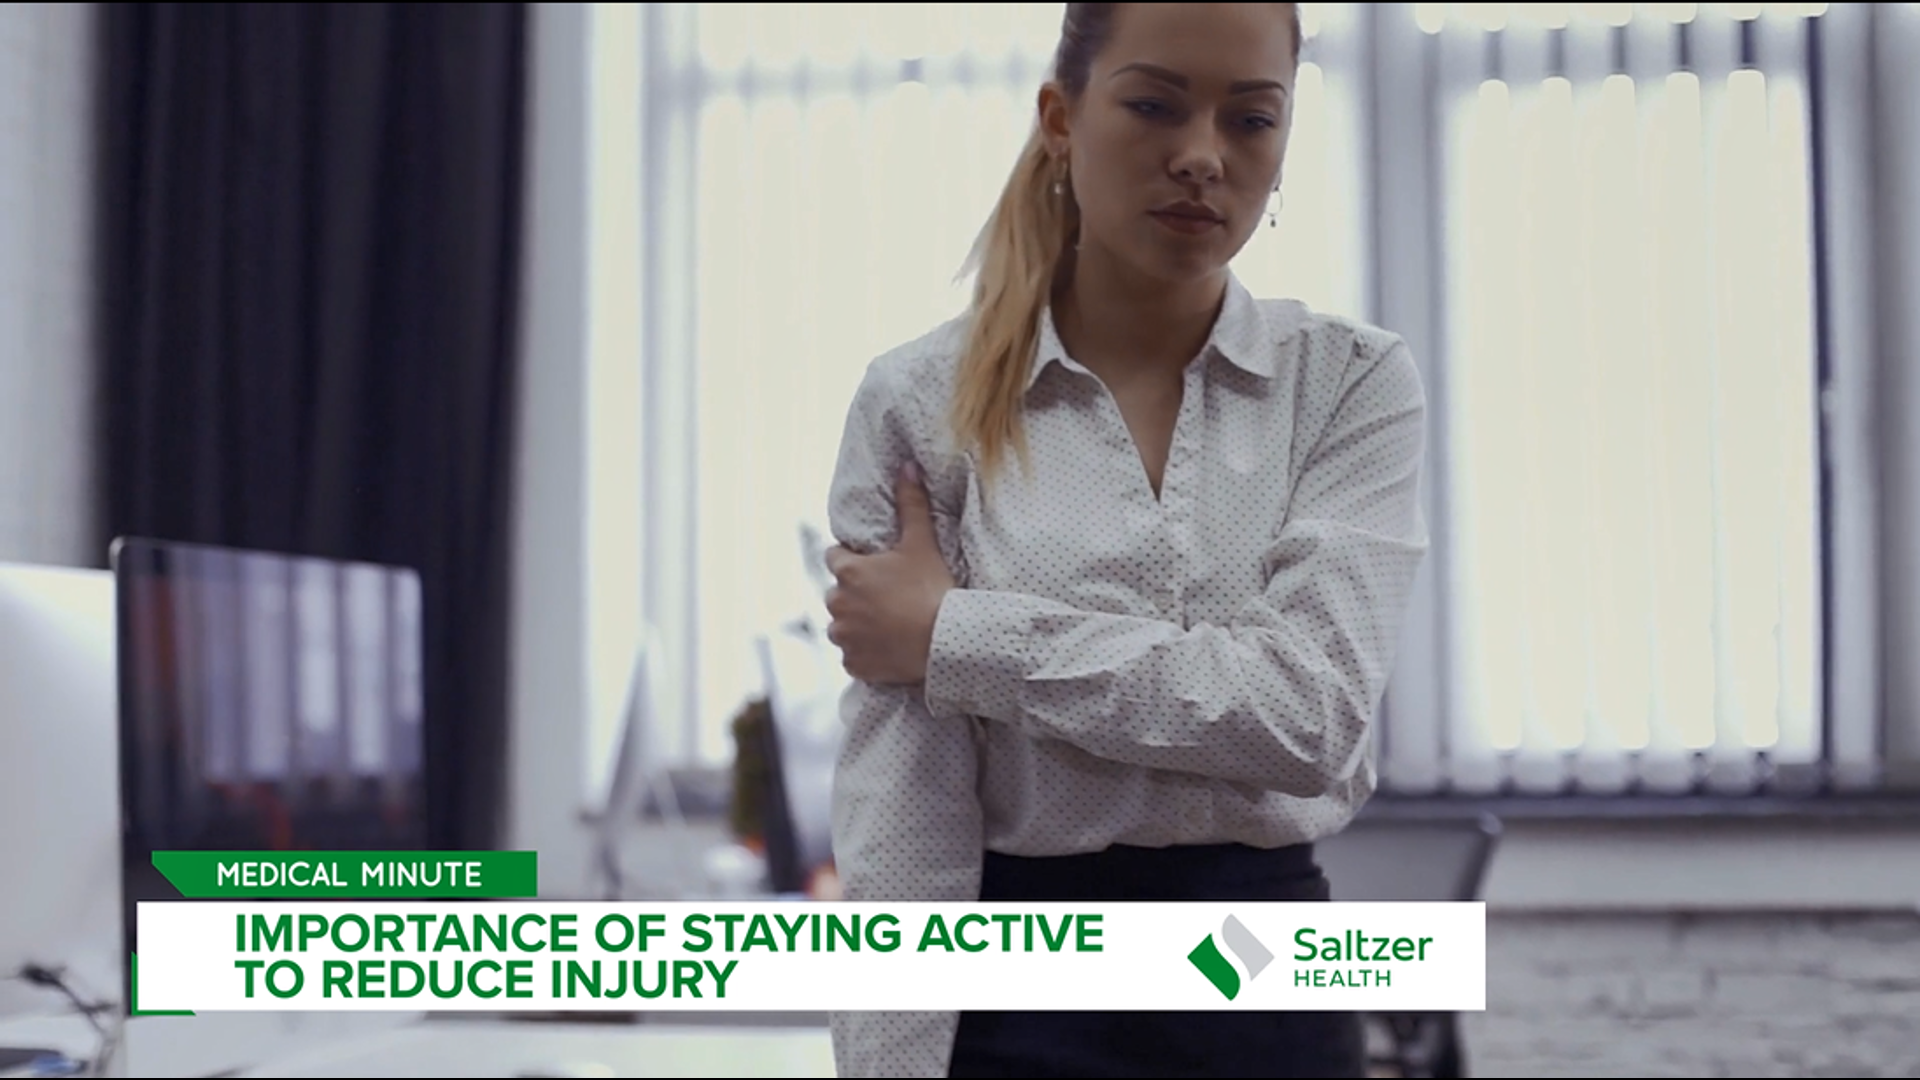 Dr. Corbett Winegar MD with Saltzer Health explains why it's important to stay active even in a pandemic in order to prevent injury